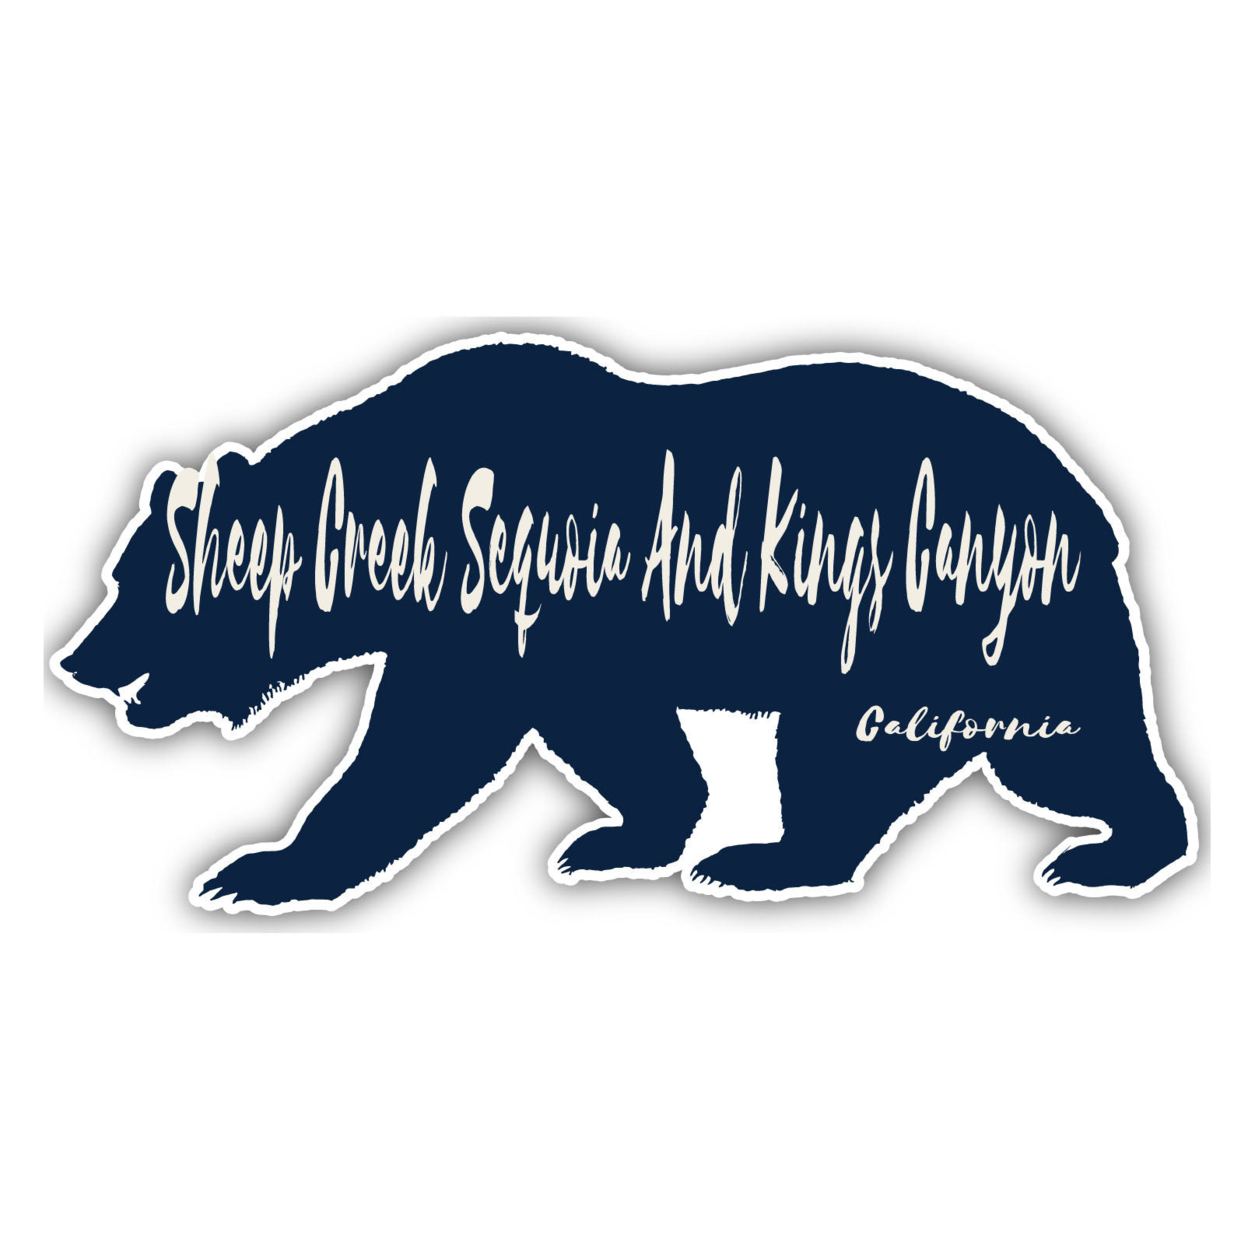 Sheep Creek Sequoia And Kings Canyon California Souvenir Decorative Stickers (Choose Theme And Size) - Single Unit, 4-Inch, Bear